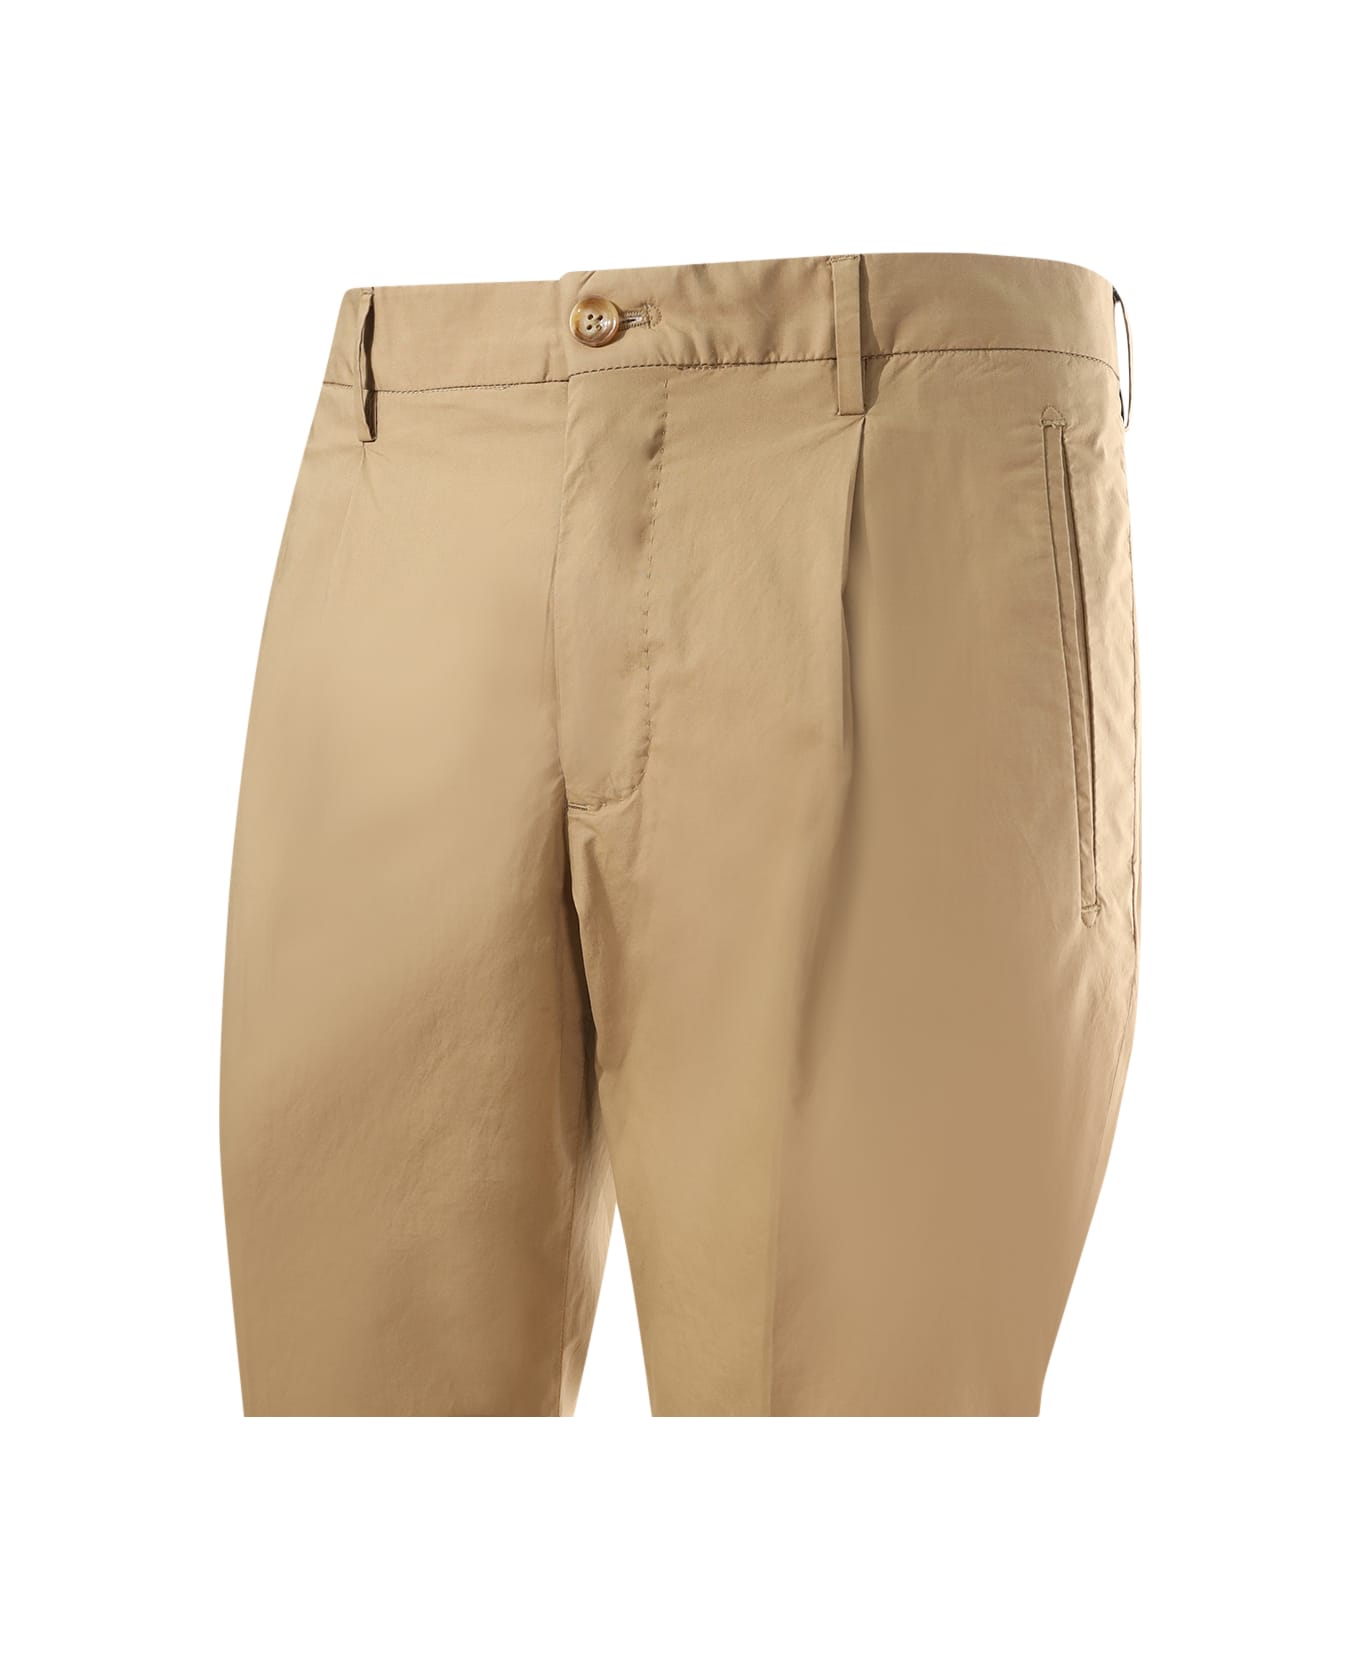 Incotex Trousers With Pleats - Rope